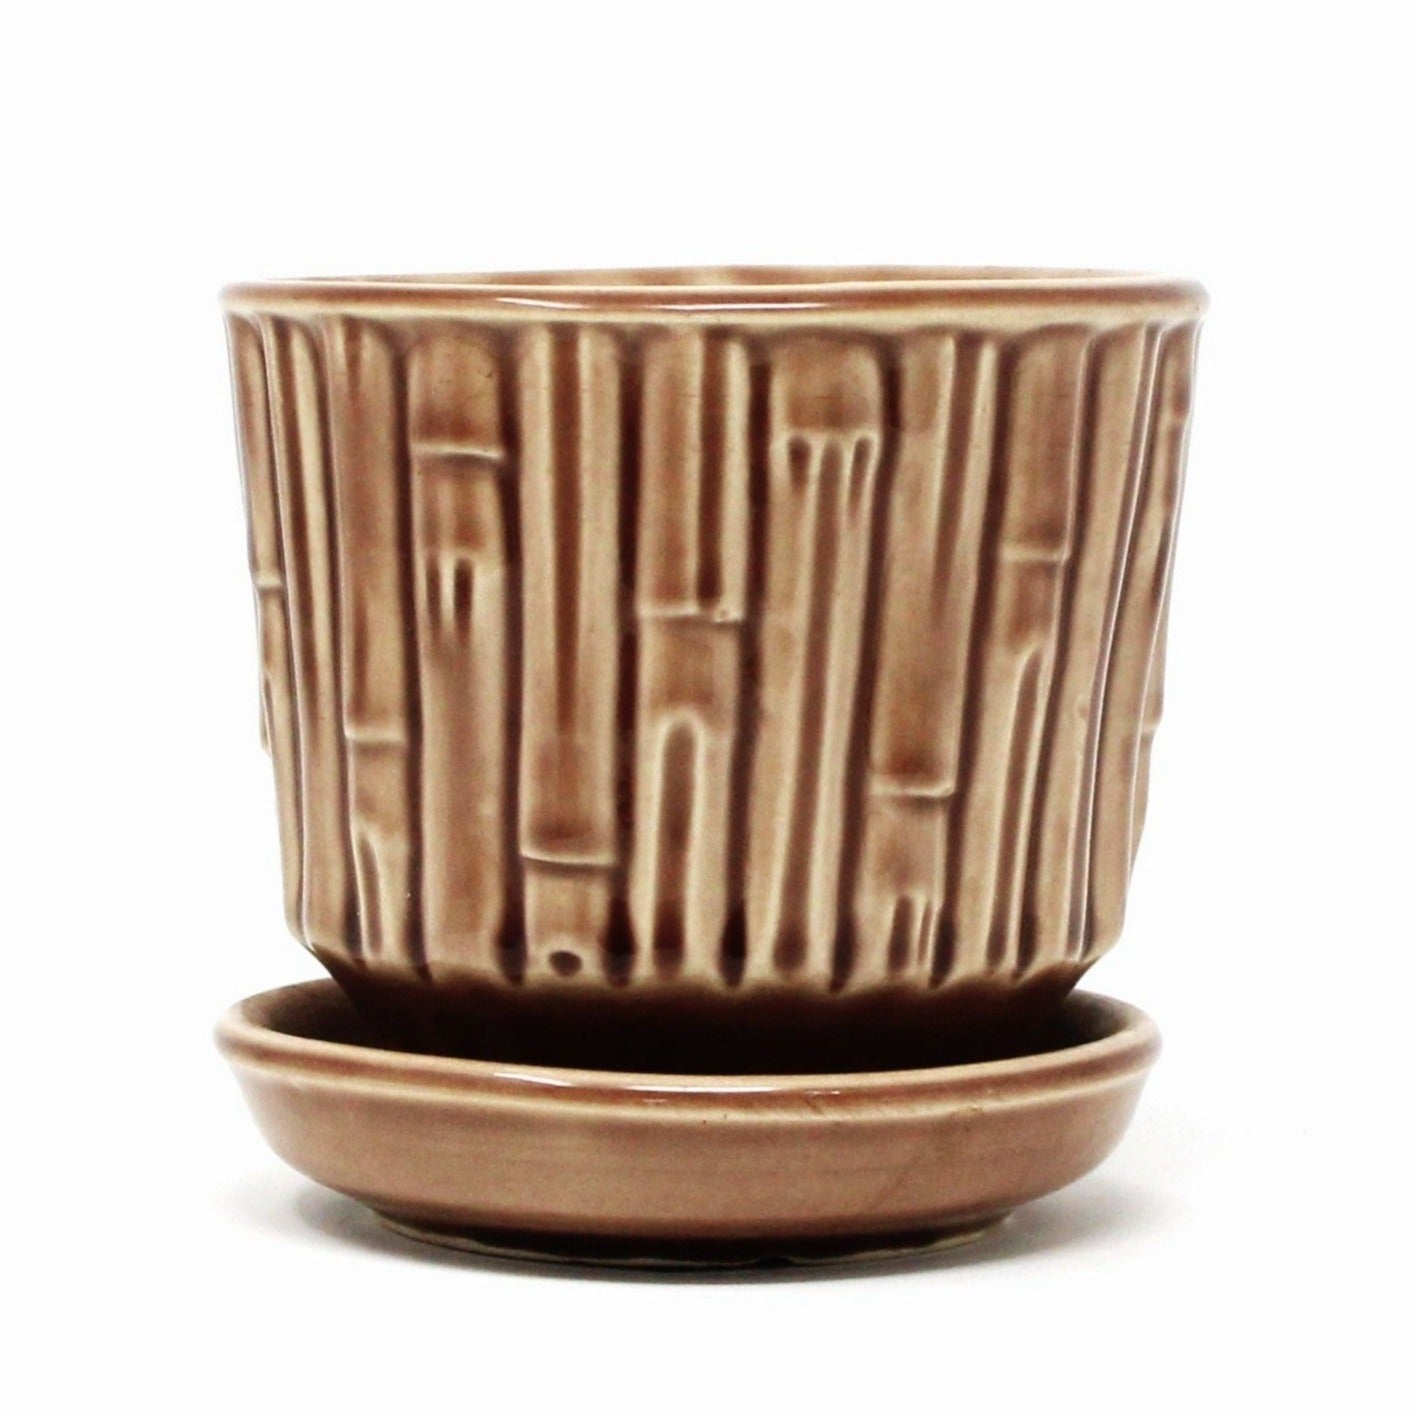 Planter, McCoy Pottery Bamboo with Attached Saucer, 0372 Tan / Brown, Vintage